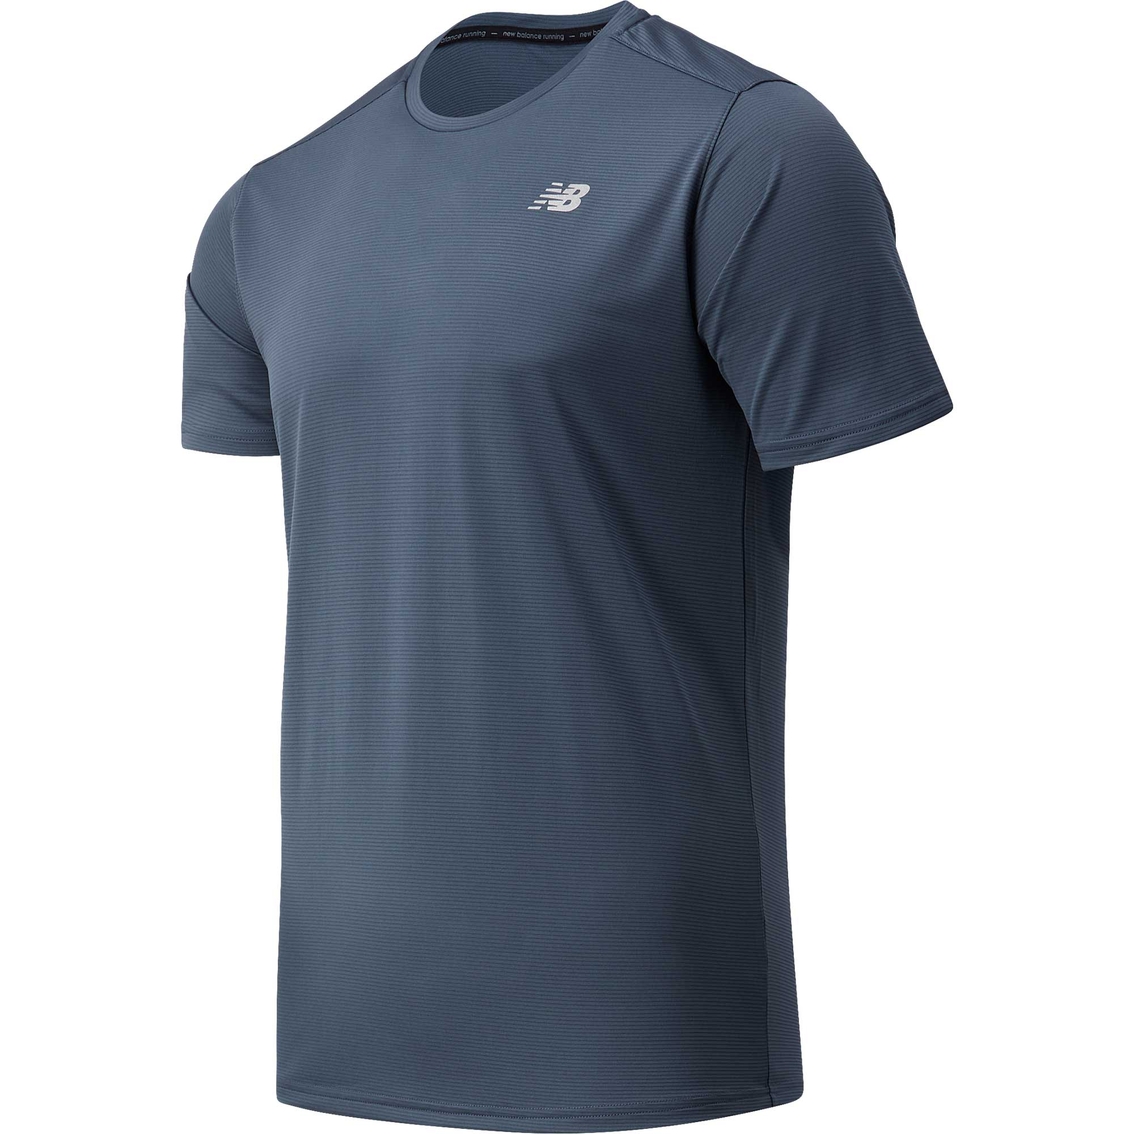 New Balance Accelerate Tee | Shirts | Clothing & Accessories | Shop The ...